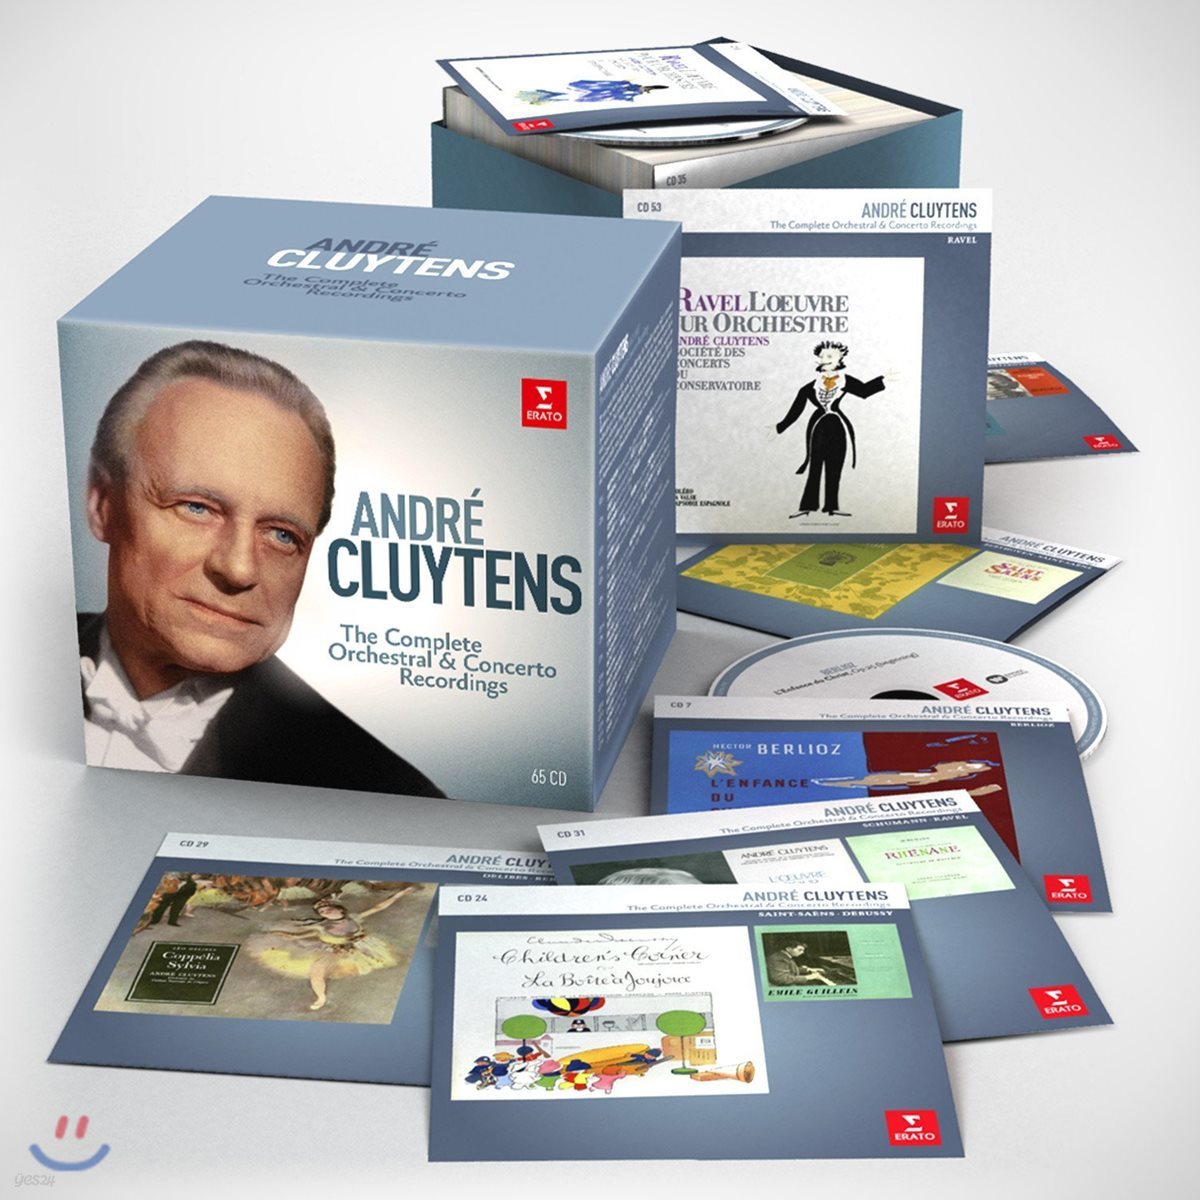 Andre Cluytens 앙드레 클뤼탕스 관현악과 협주곡 전집 (The Complete Orchestral &amp; Concerto Recordings)